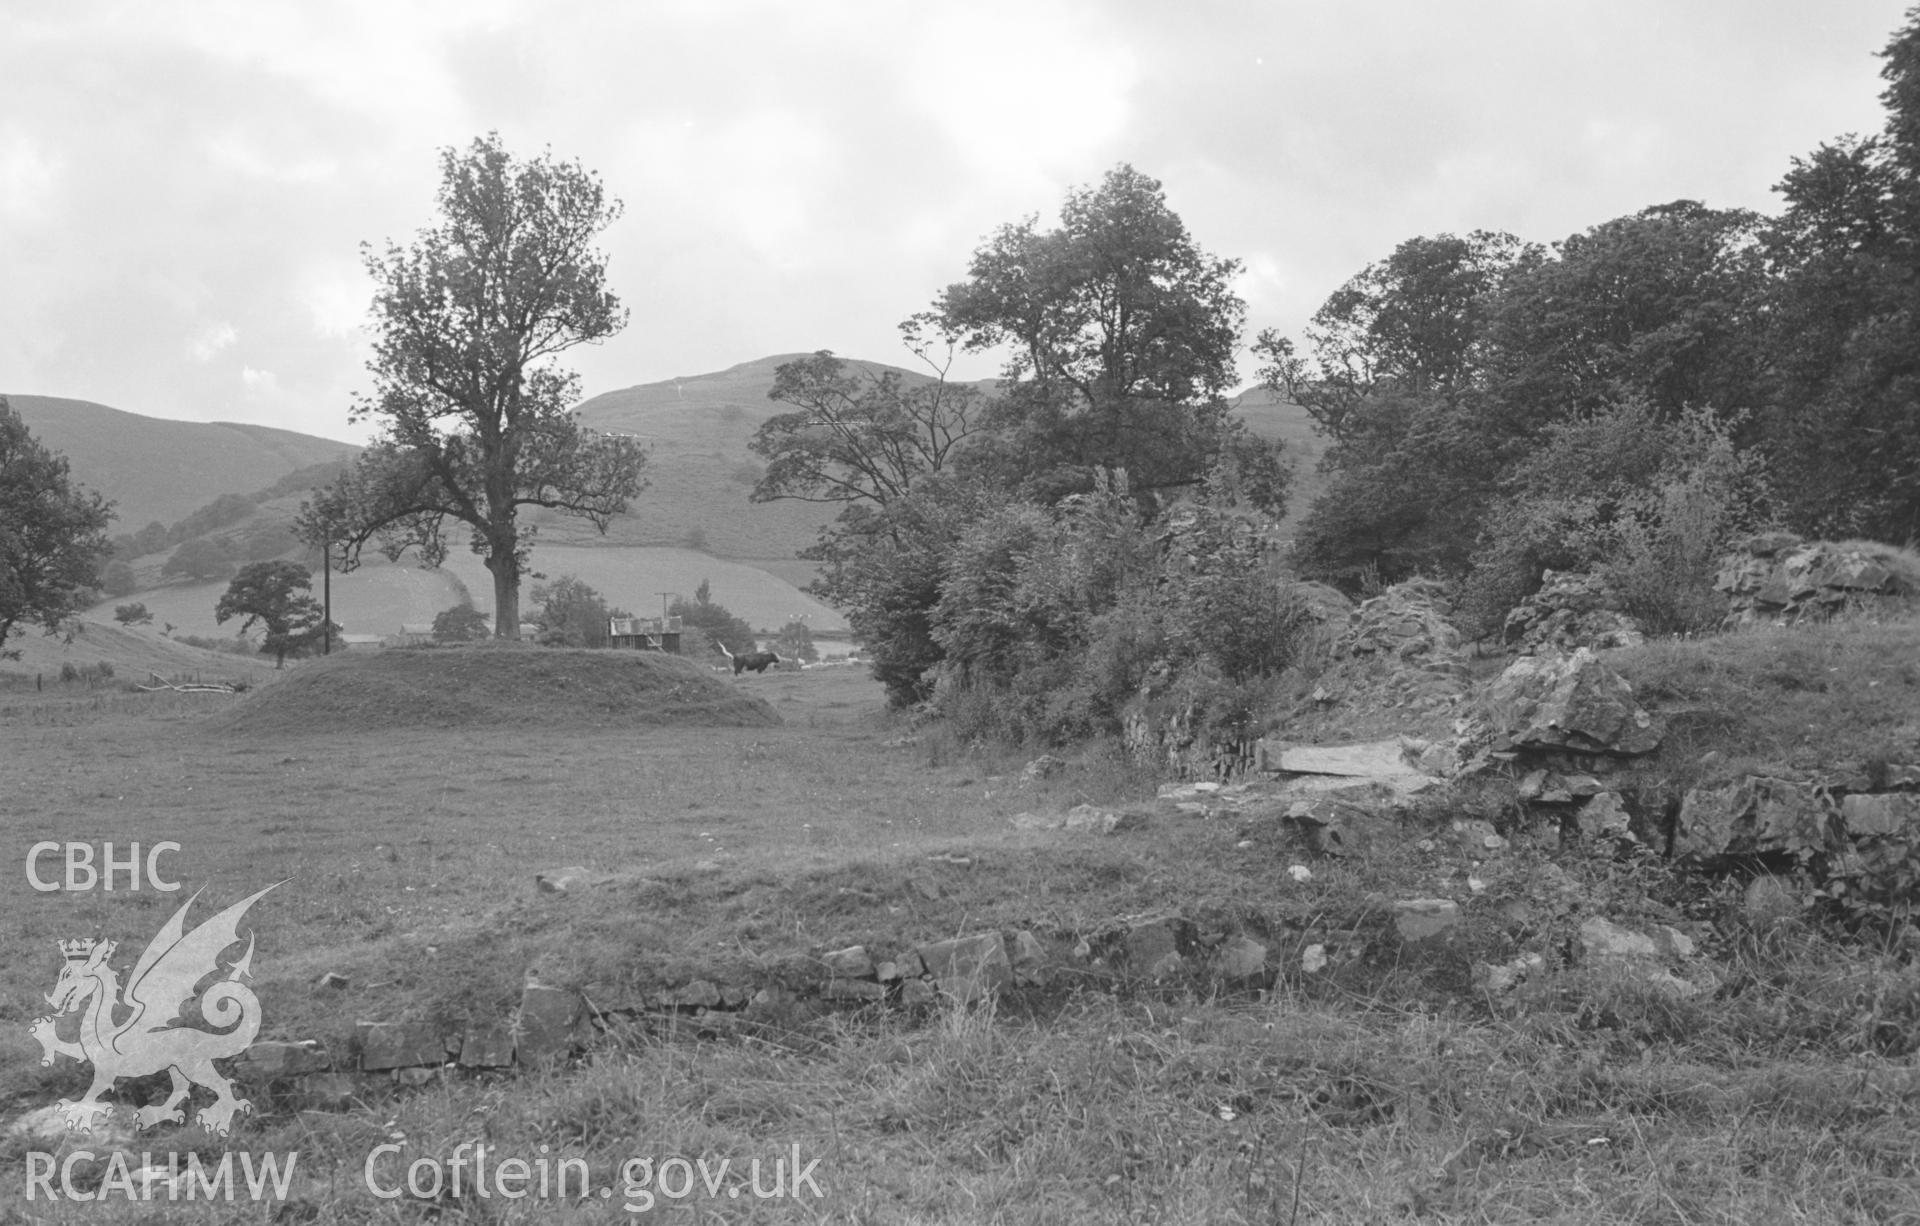 Digital copy of a black and white negative showing Abbey Cwmhir ruins. Photographed in August 1963 by Arthur O. Chater.